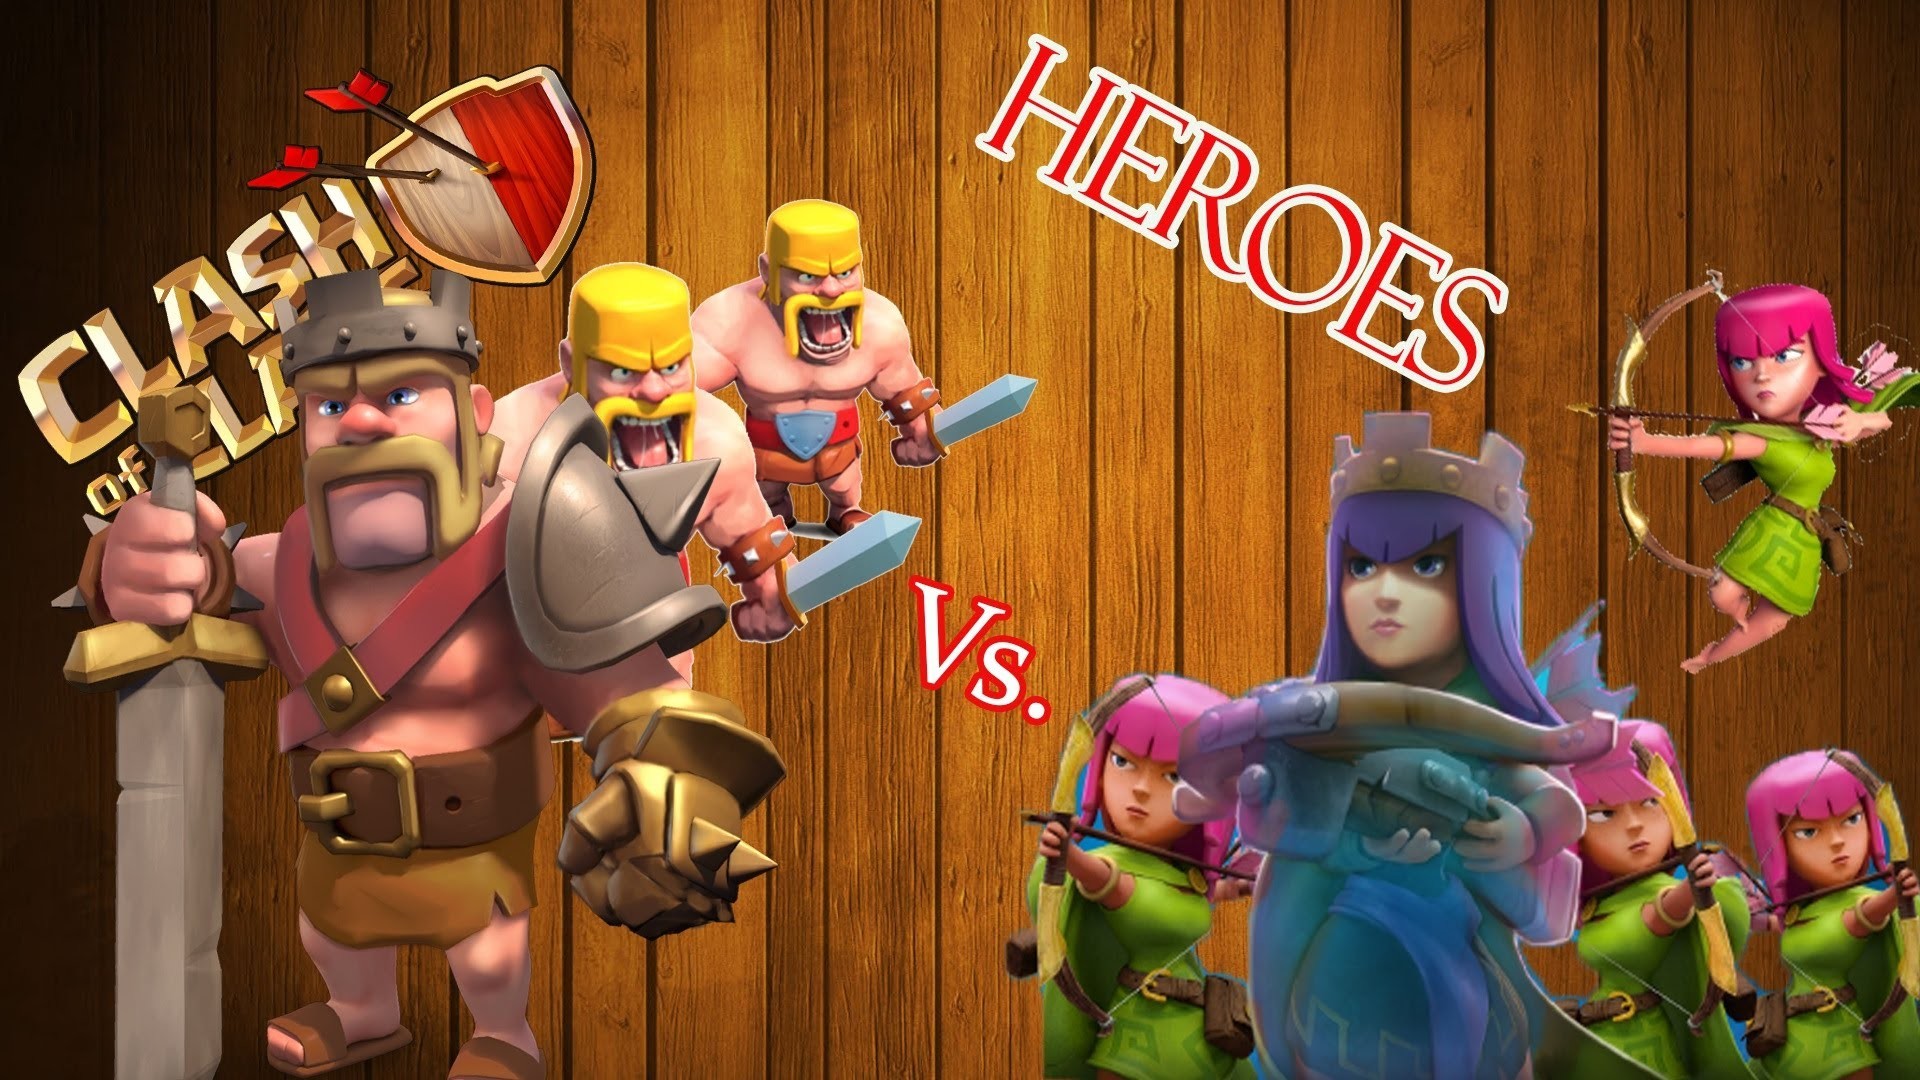 Clash of Clans Barbarian King Archer Queen vs B. King A. Queen With New Special Ability Summon – YouTube